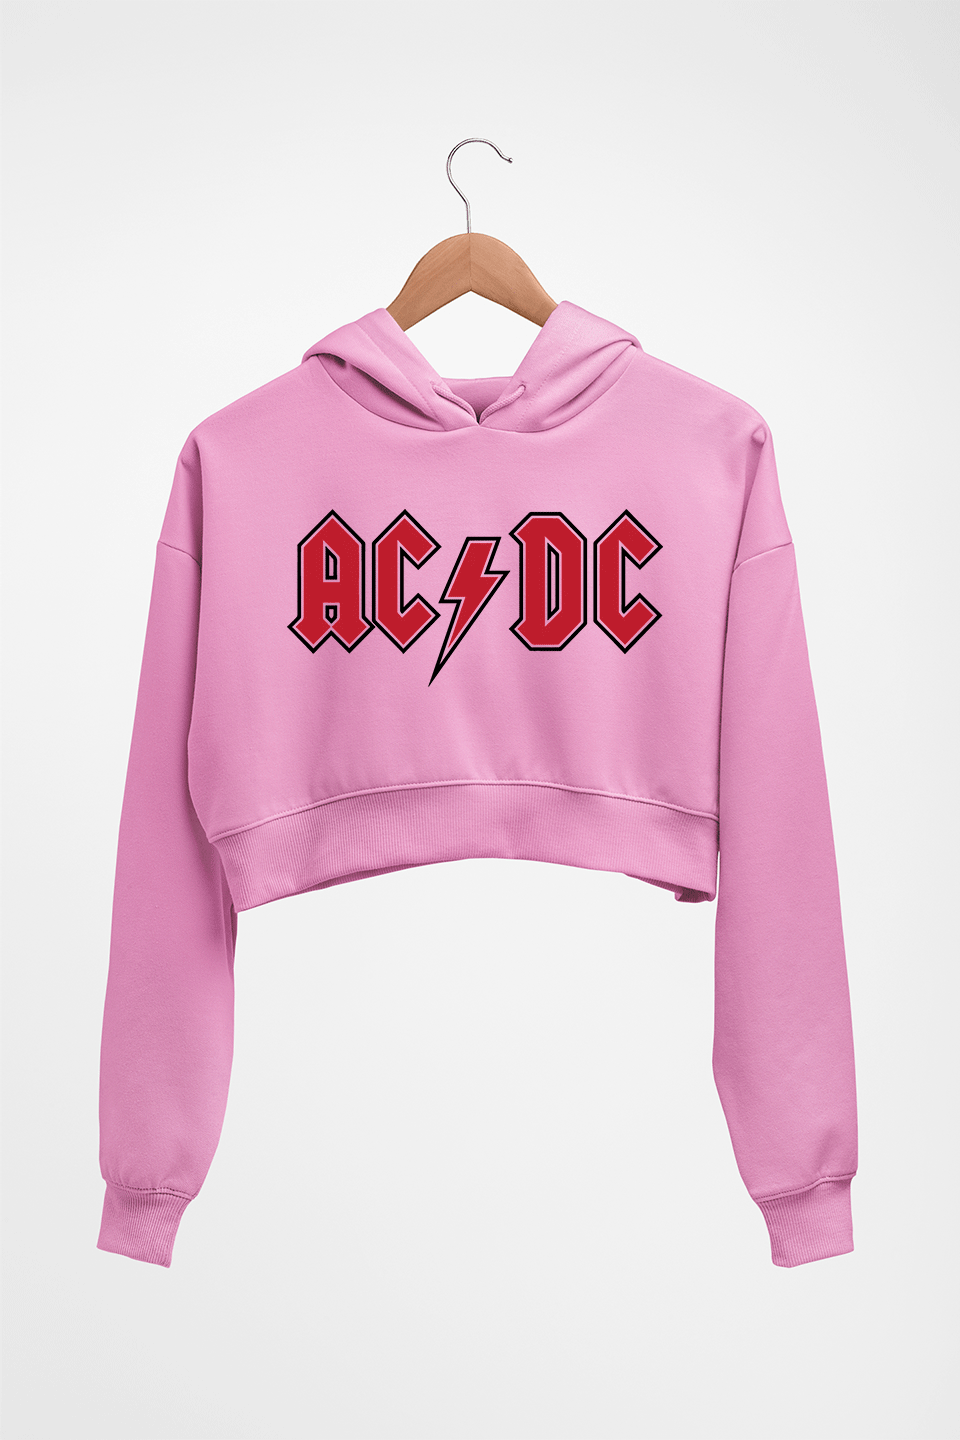 ACDC Crop HOODIE FOR WOMEN